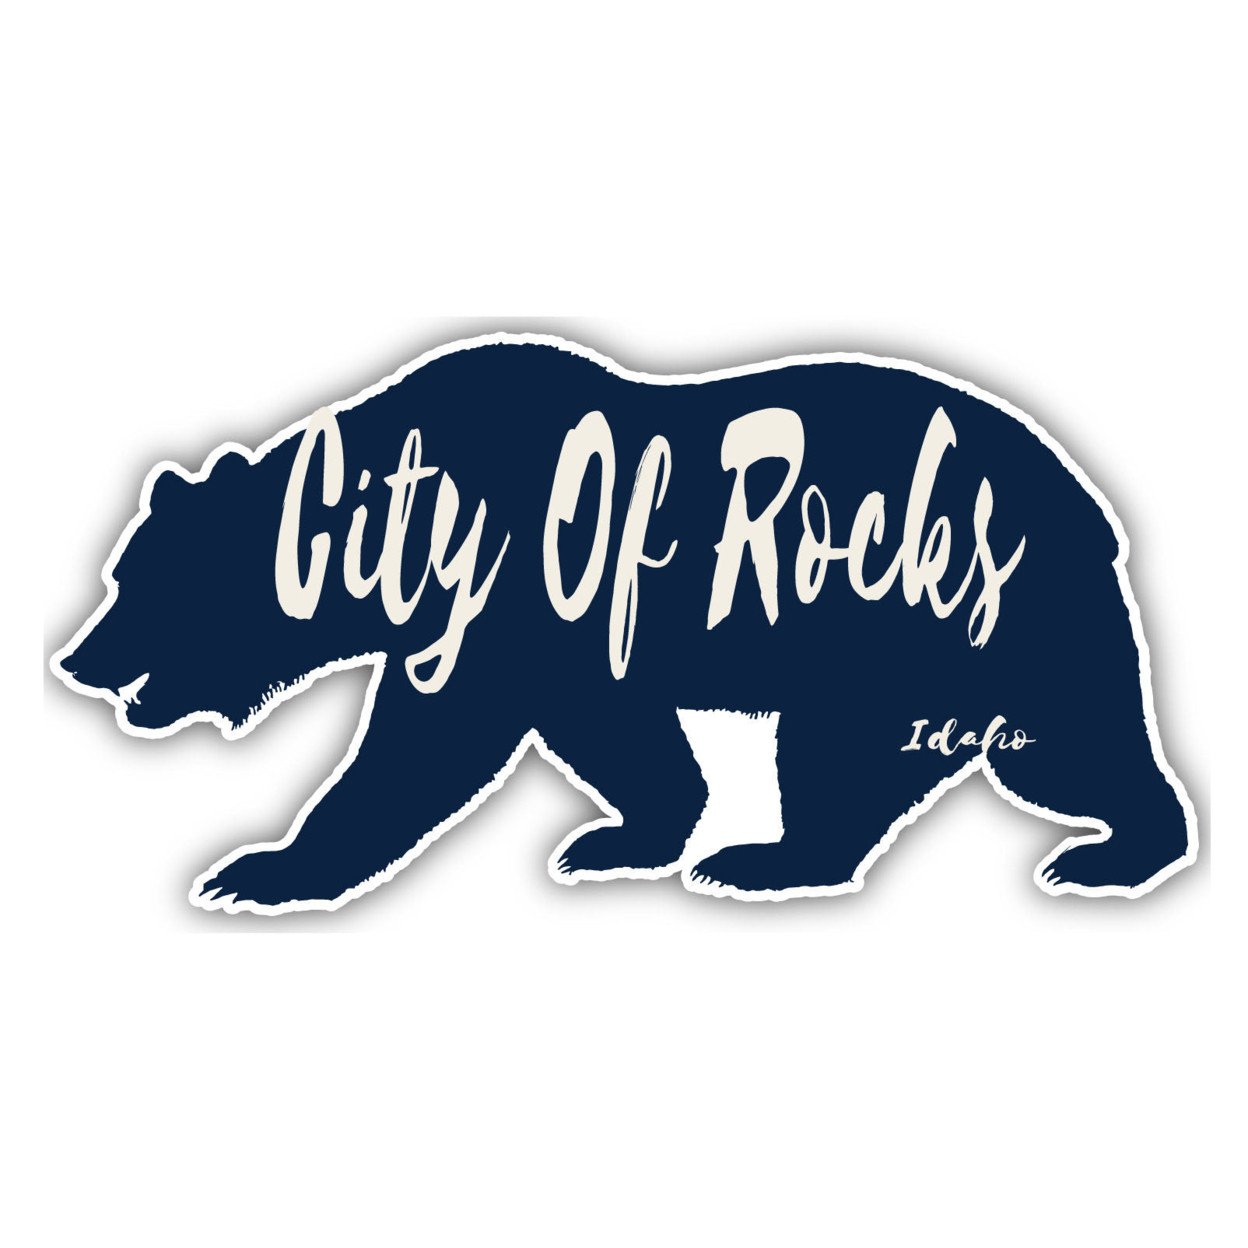 City Of Rocks Idaho Souvenir Decorative Stickers (Choose Theme And Size) - 4-Pack, 8-Inch, Tent